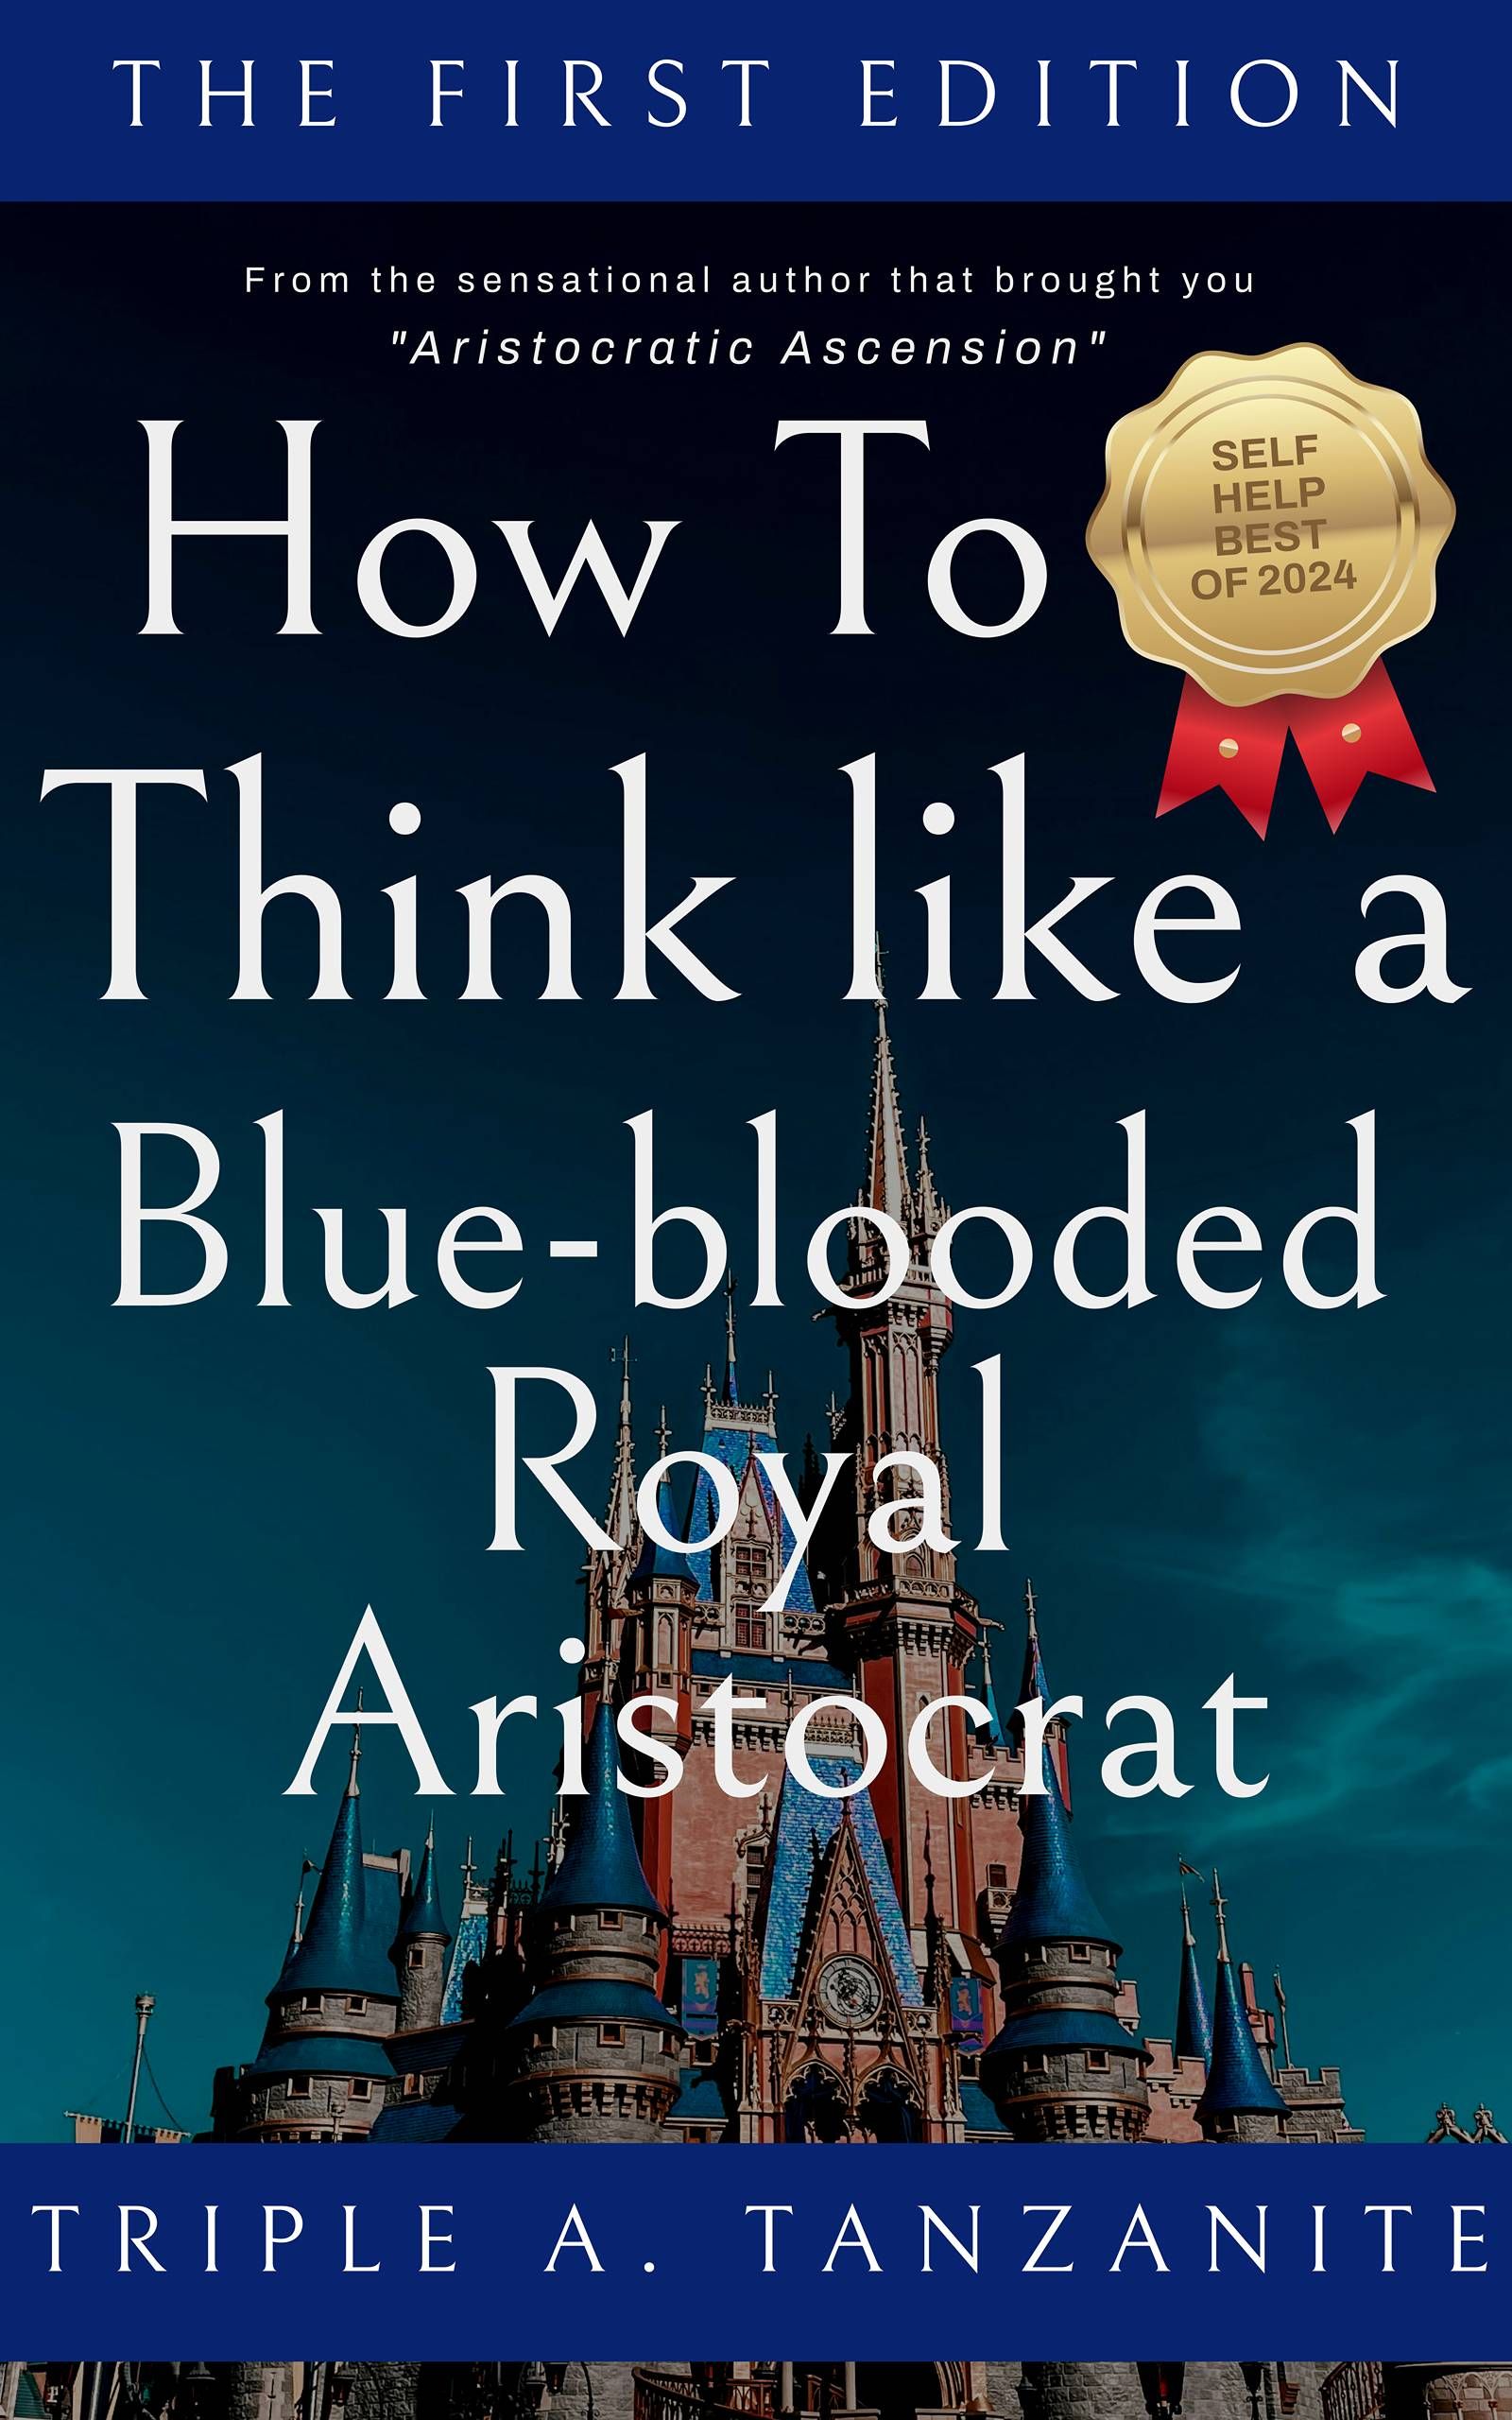 https://storage.tally.so/e85d48b3-15f9-442a-94a2-a5b7bdf1f9c8/How-To-Think-Like-A-Blue-blooded-Royal-Aristocrat.jpg